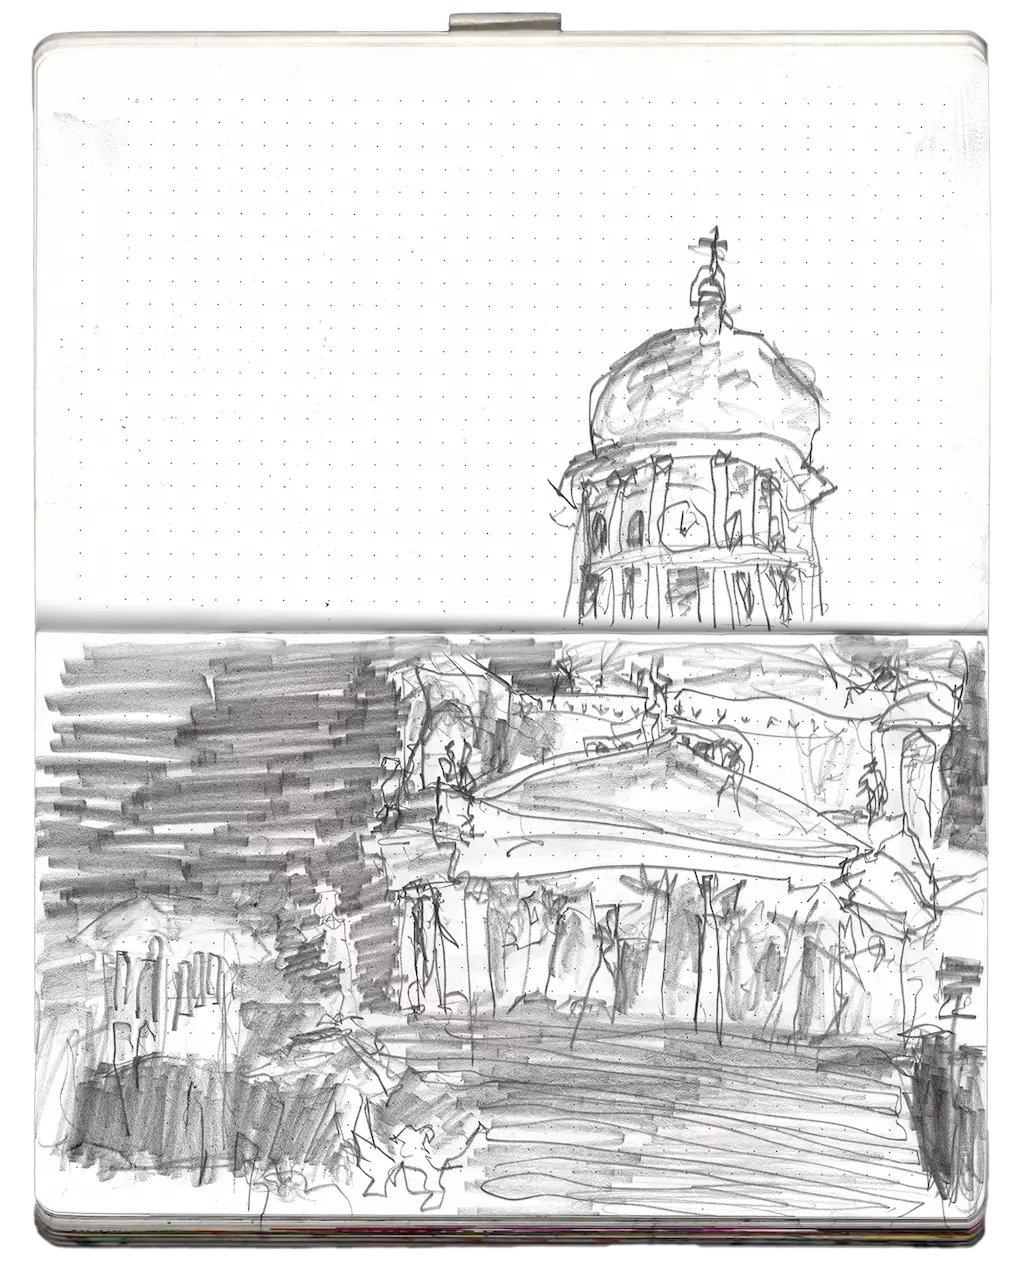 A sketch of the Tuomiokirkko (the Helsinki Cathedral) I made over the summer of 2019.